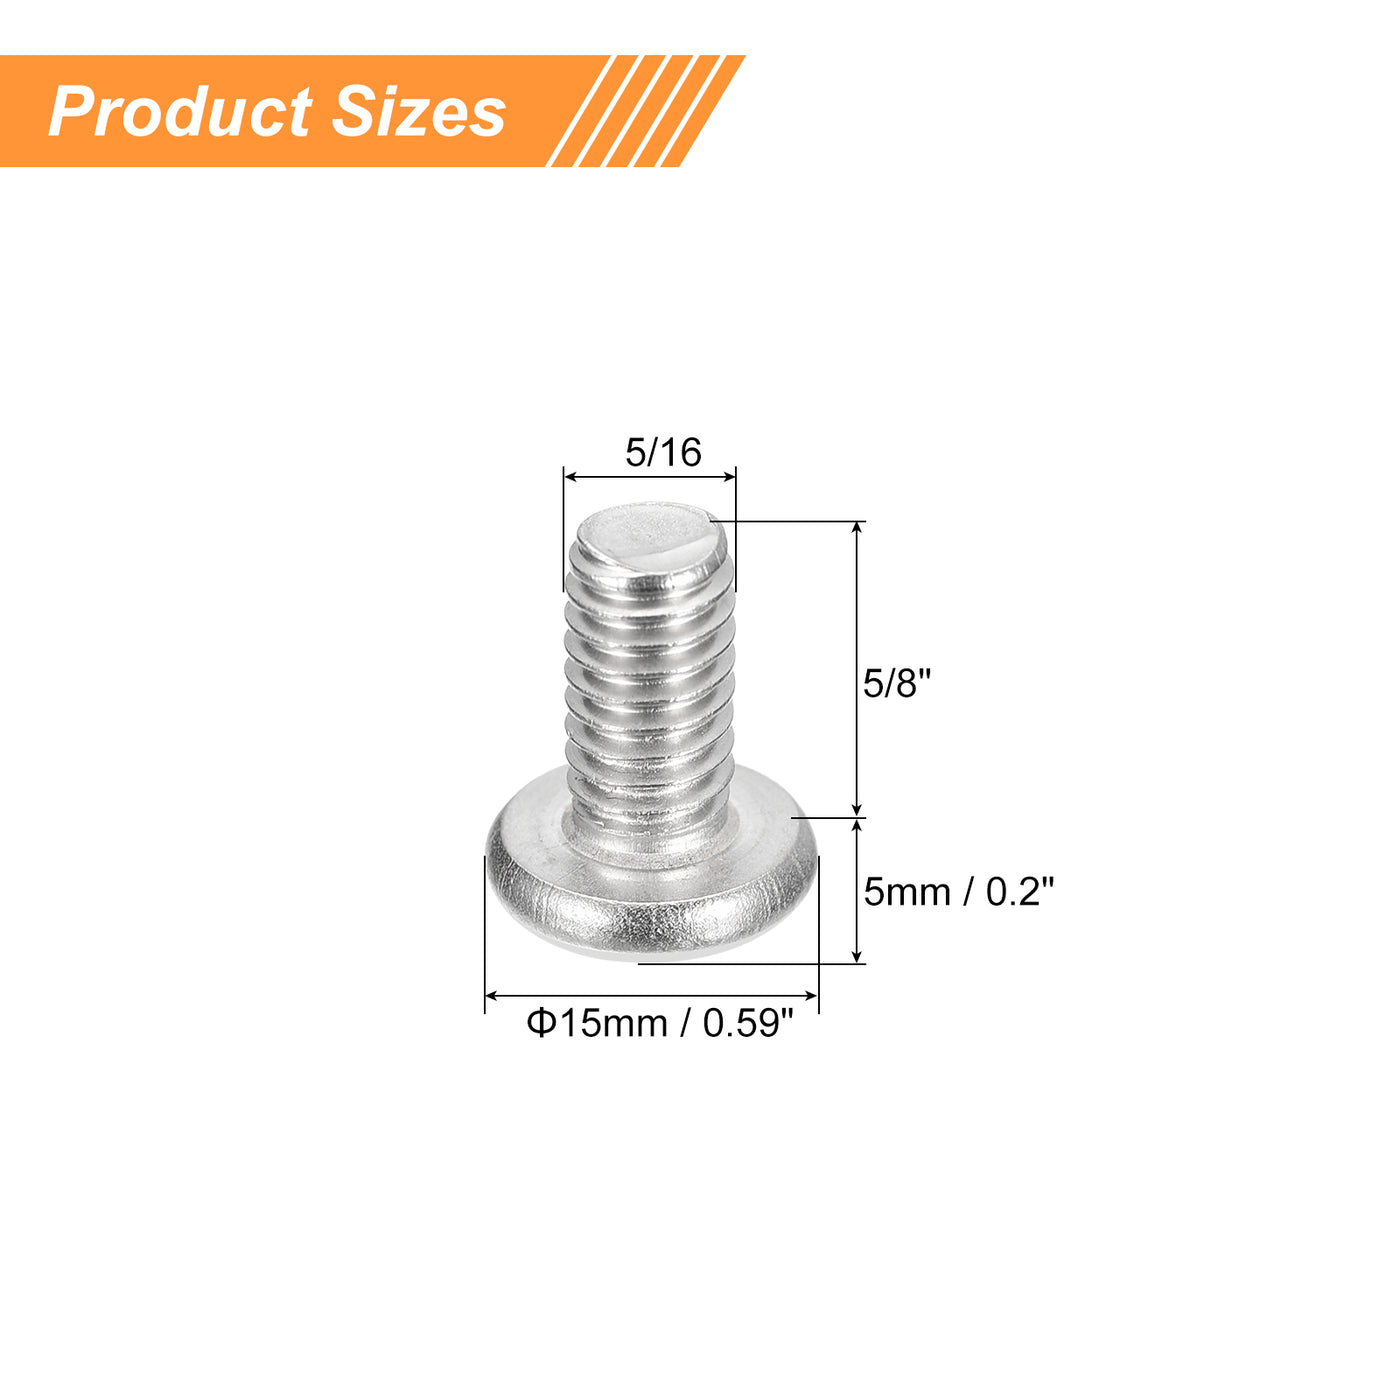 uxcell Uxcell 5/16-18x5/8" Pan Head Machine Screws, Stainless Steel 18-8 Screw, Pack of 5